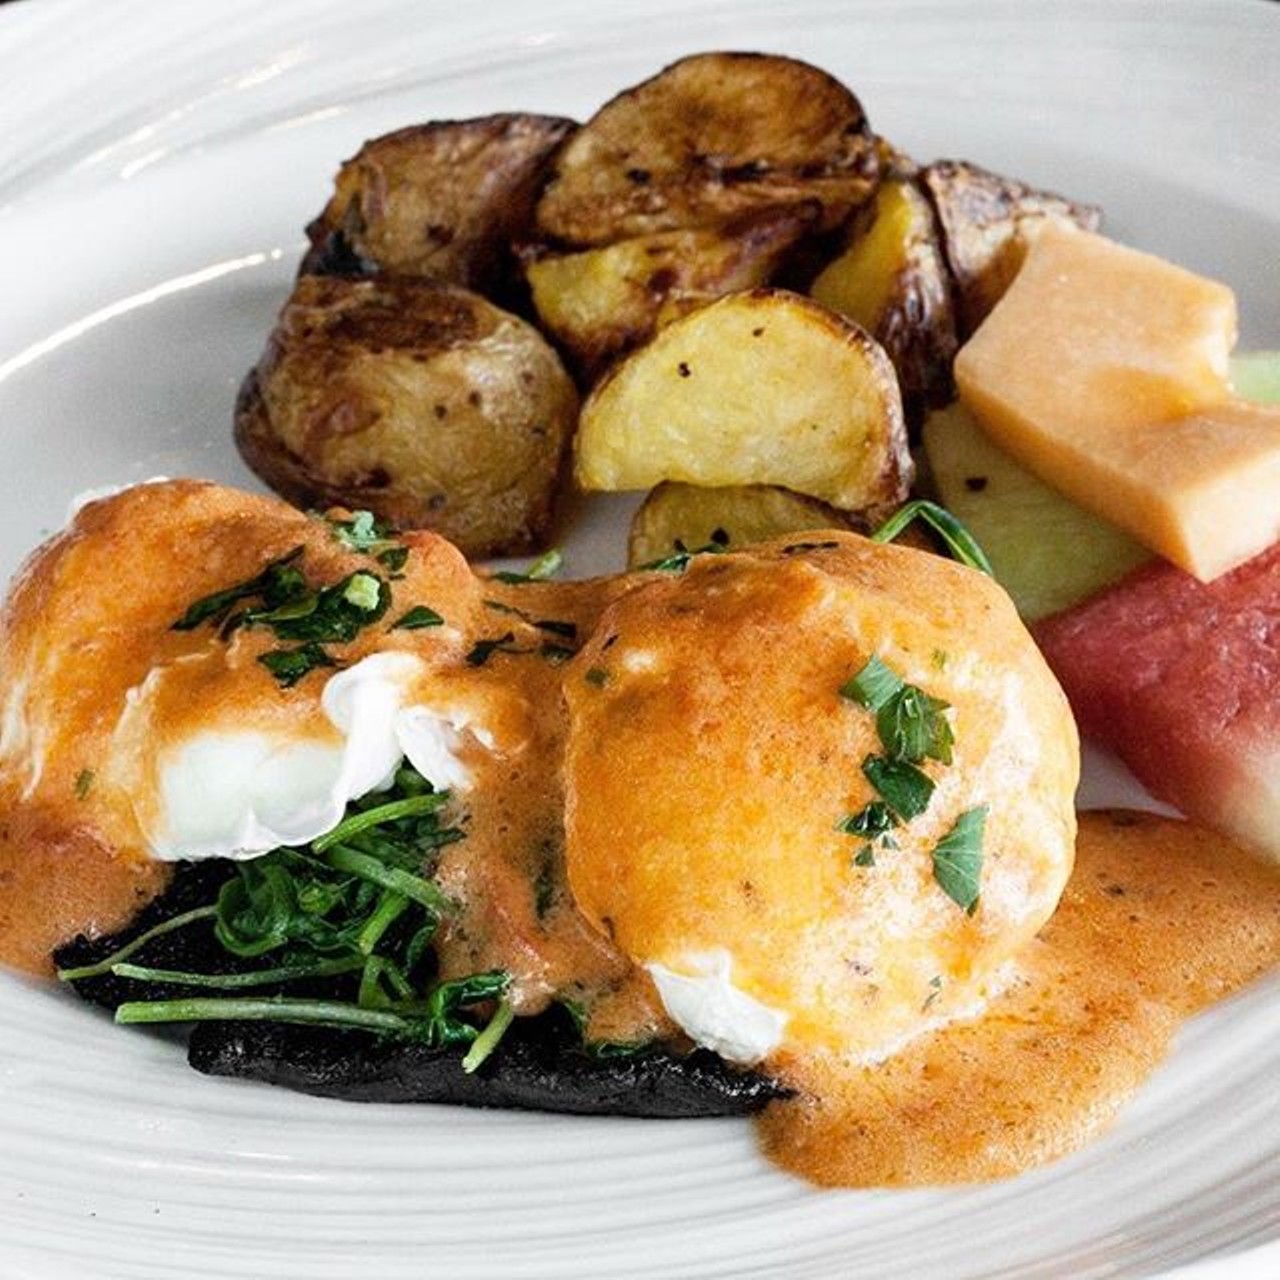 Andiamo
Multiple locations
You can expect all the Easter brunch staples: carving station, omelets, and other delicious brunch food. Prices vary. Photo via @andiamos.